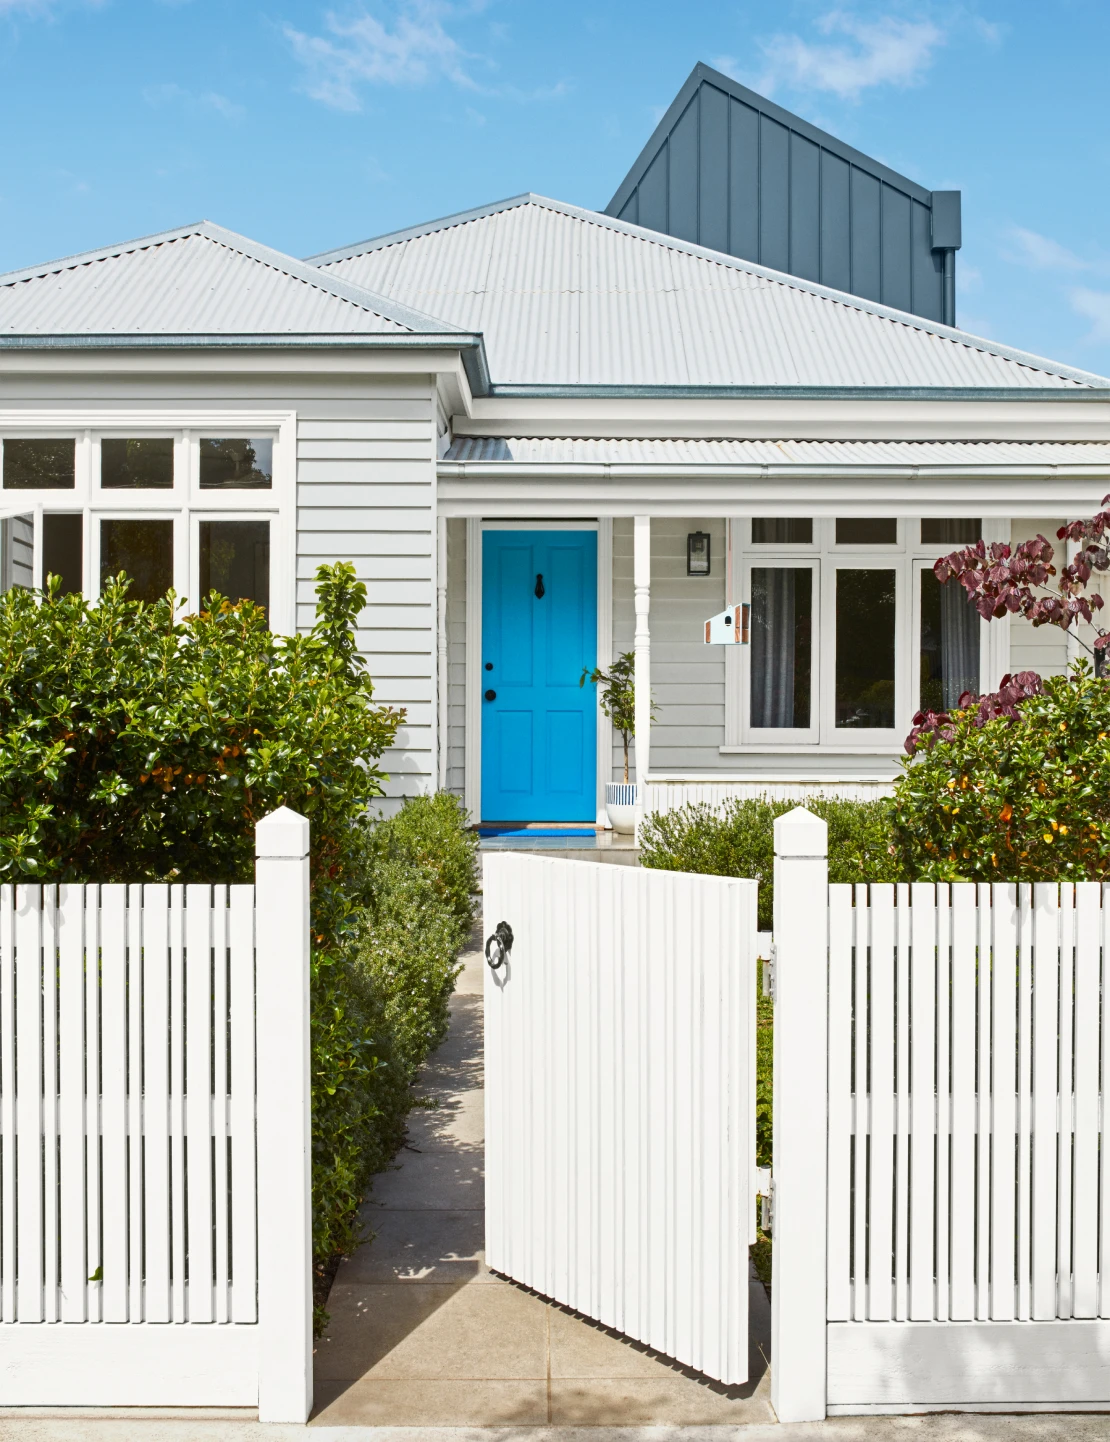 Weatherboard exterior house with Southern Alps coloured fence and house trims, Ti Point coloured weatherboards and High Blue coloured Door.